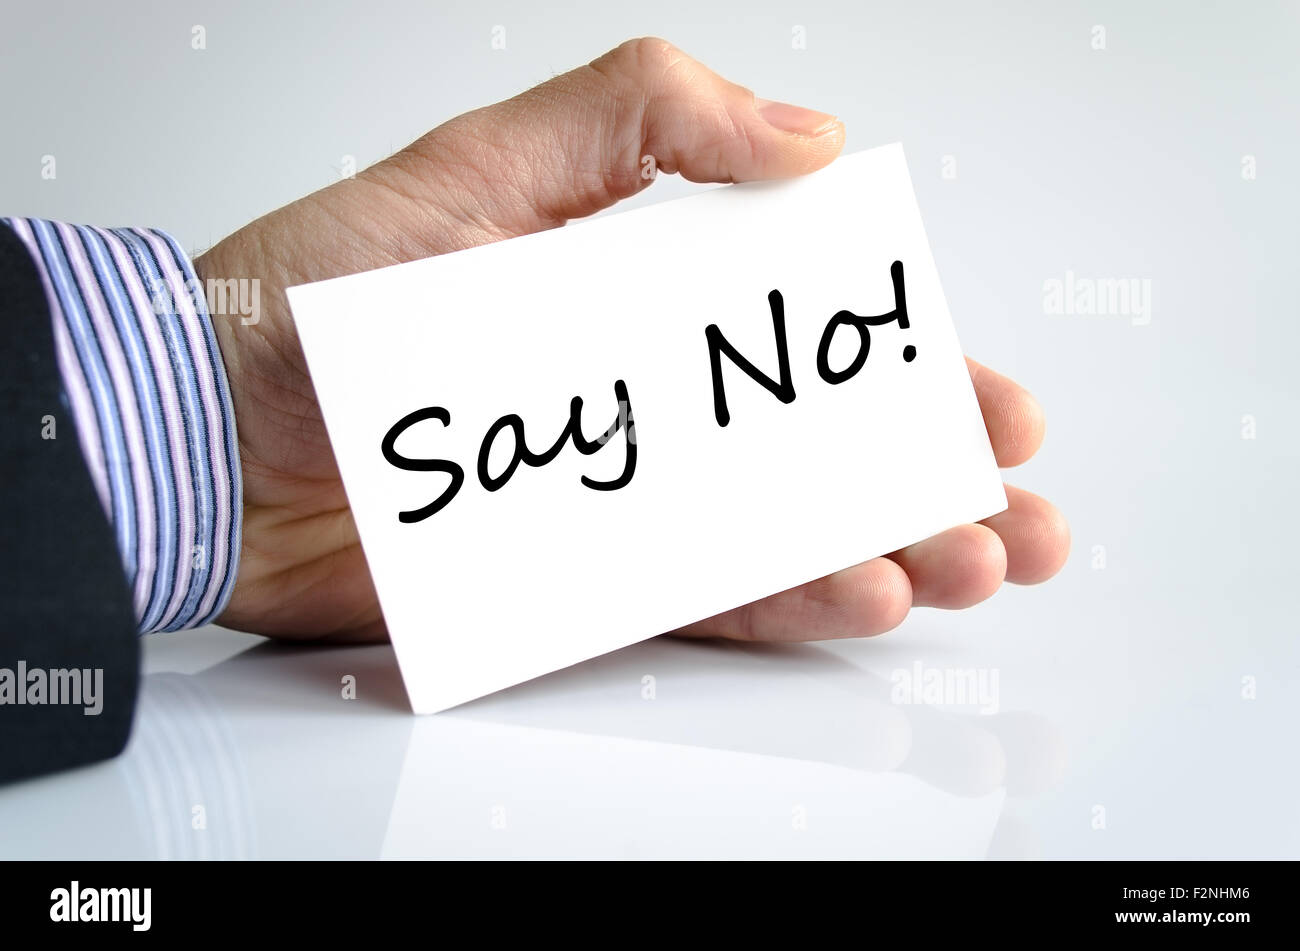 Say no text concept isolated over white background Stock Photo